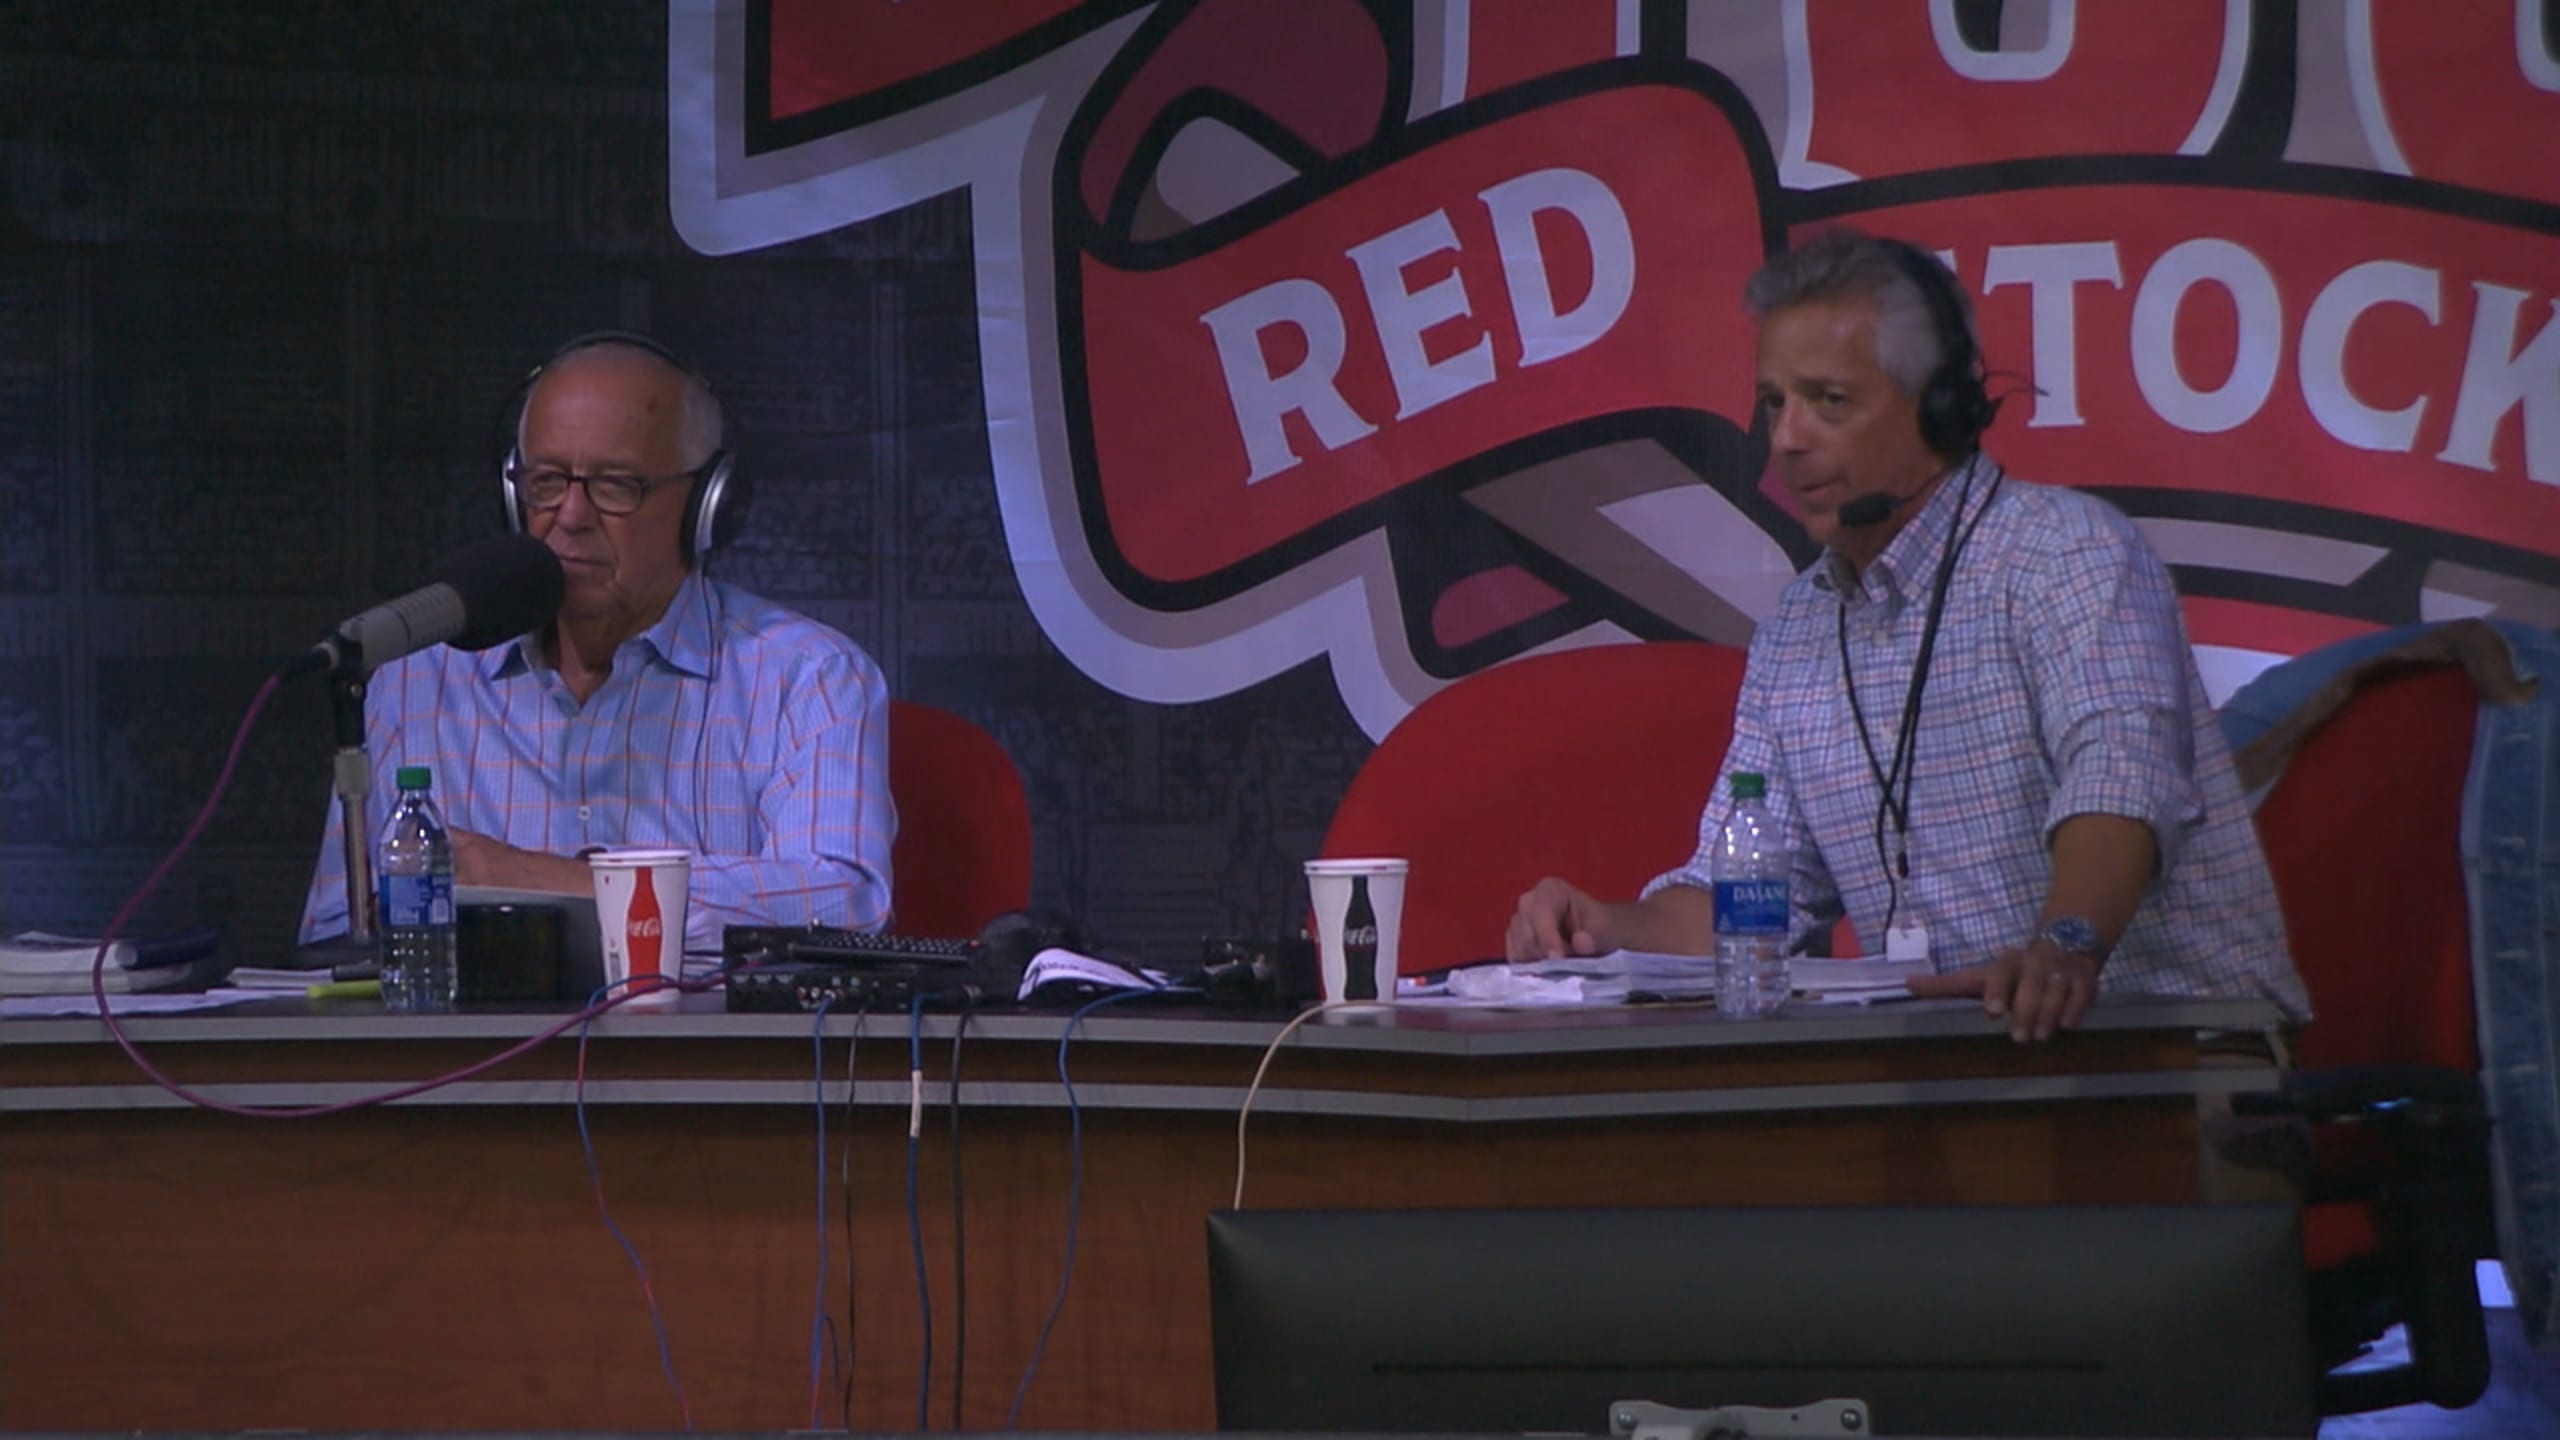 Marty Brennaman was joined by his son Thom, Bob Uecker in his